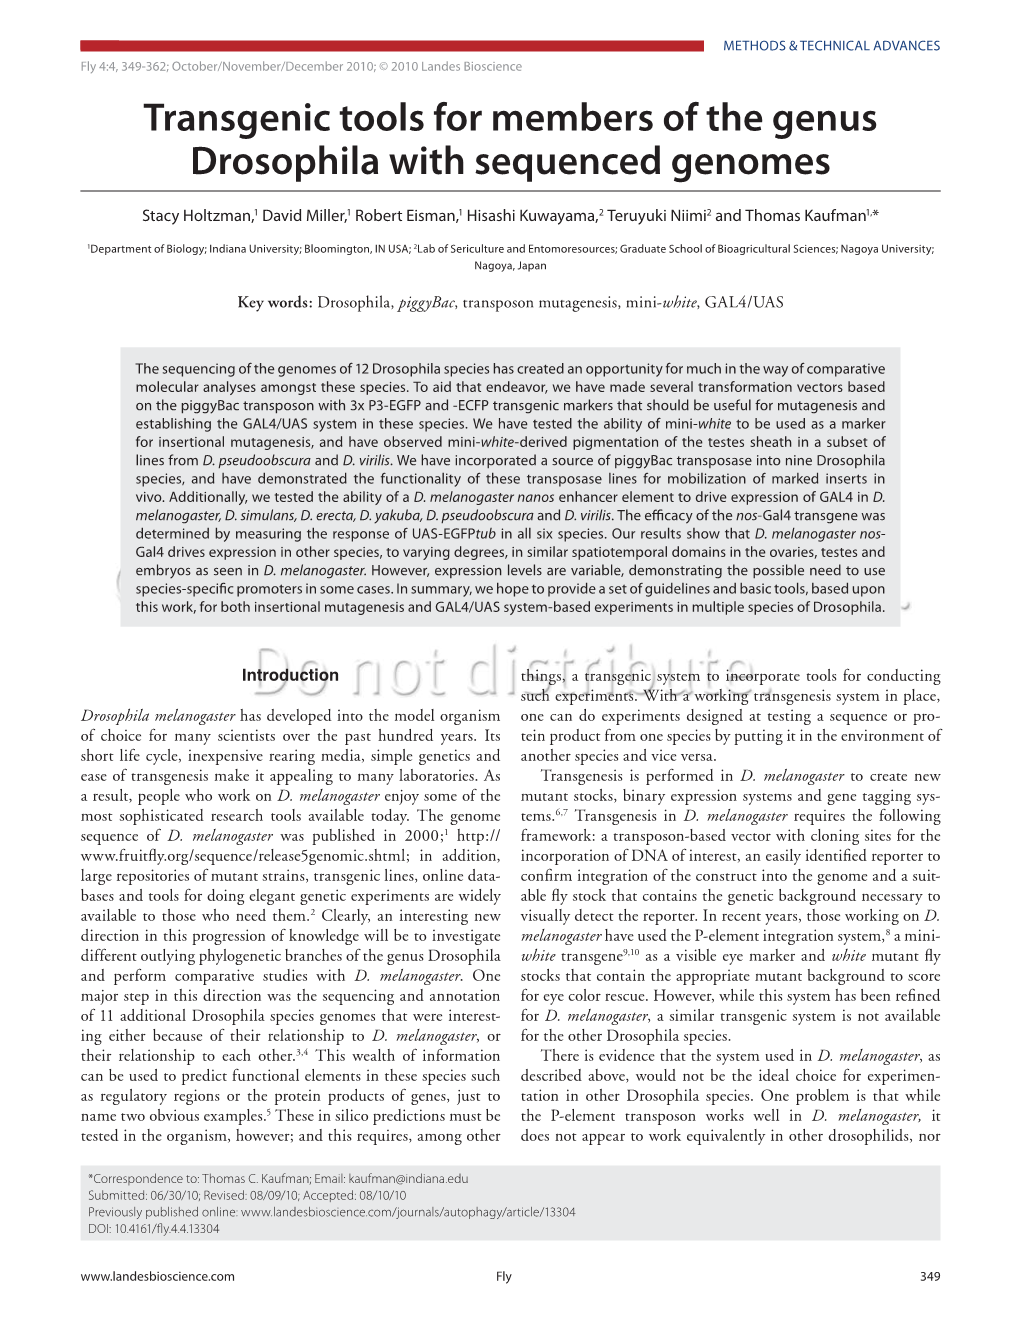 Transgenic Tools for Members of the Genus Drosophila with Sequenced Genomes